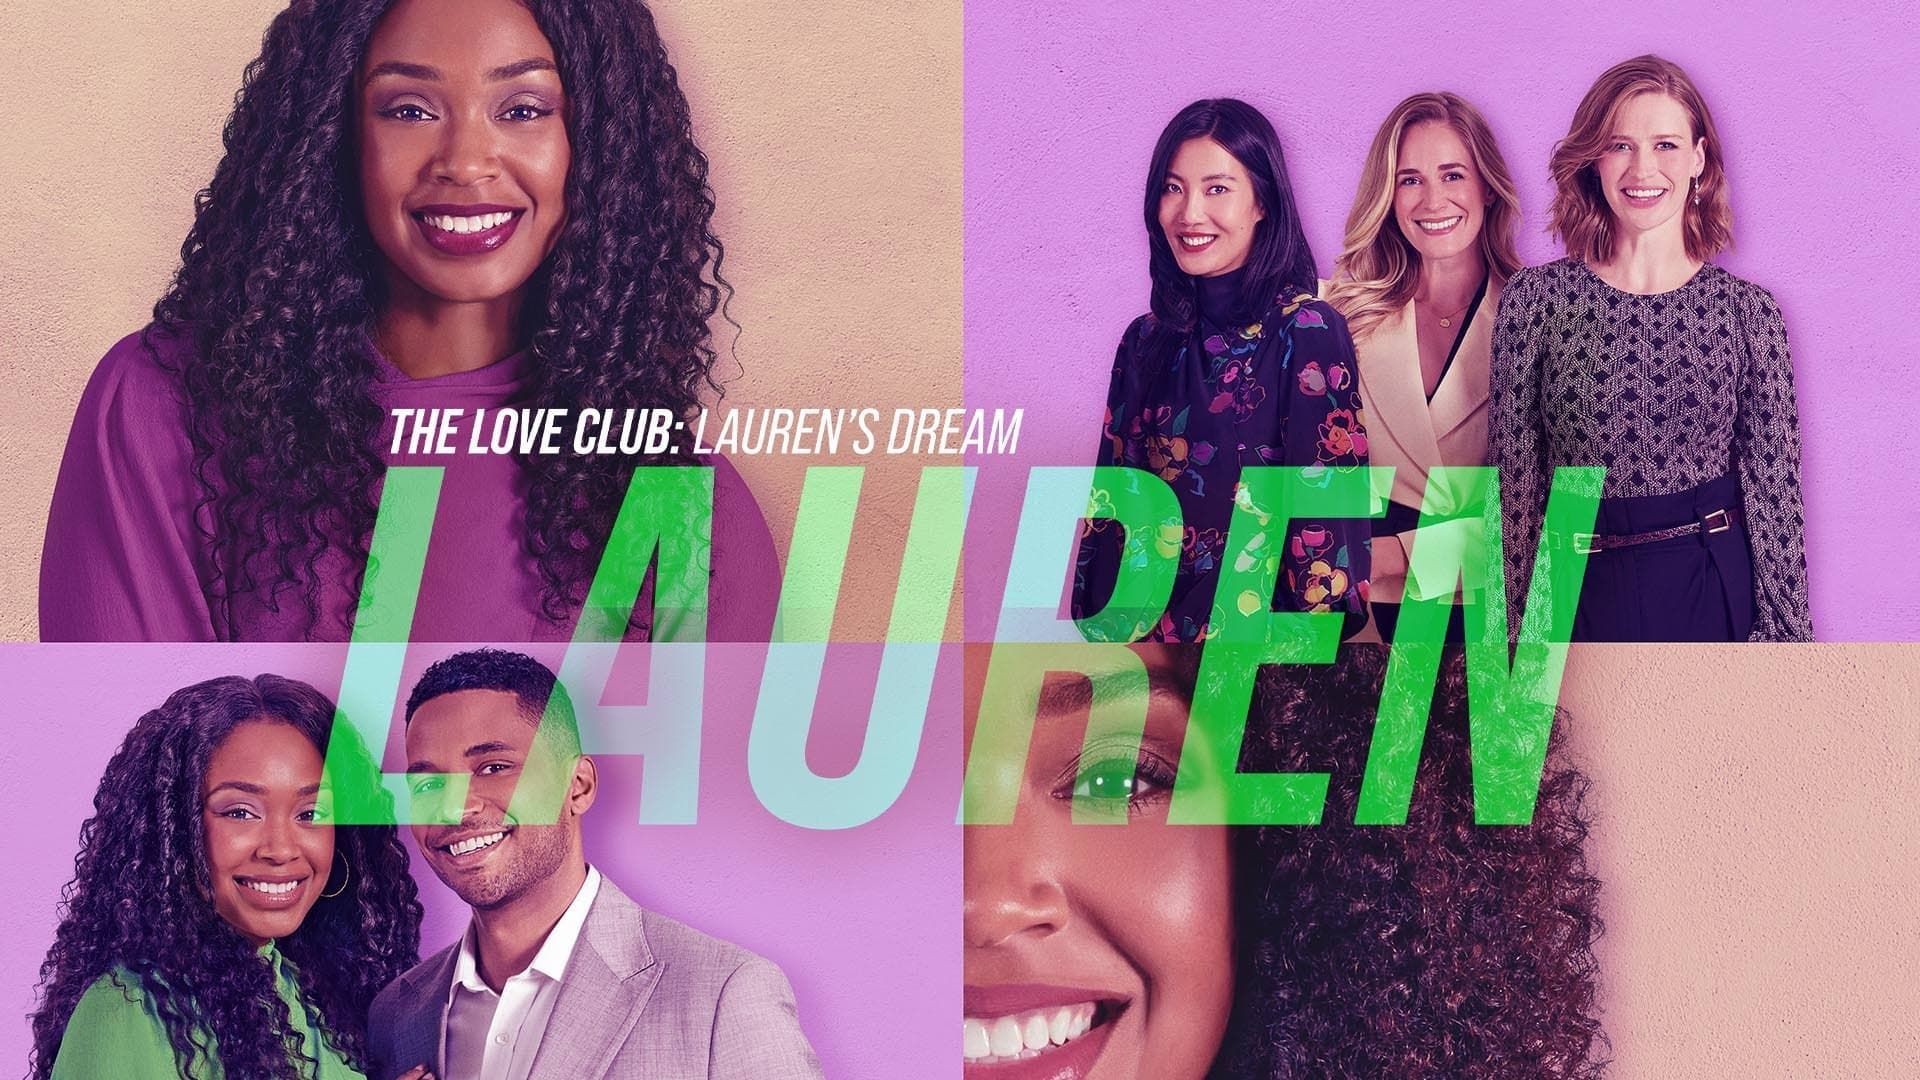 The Love Club background